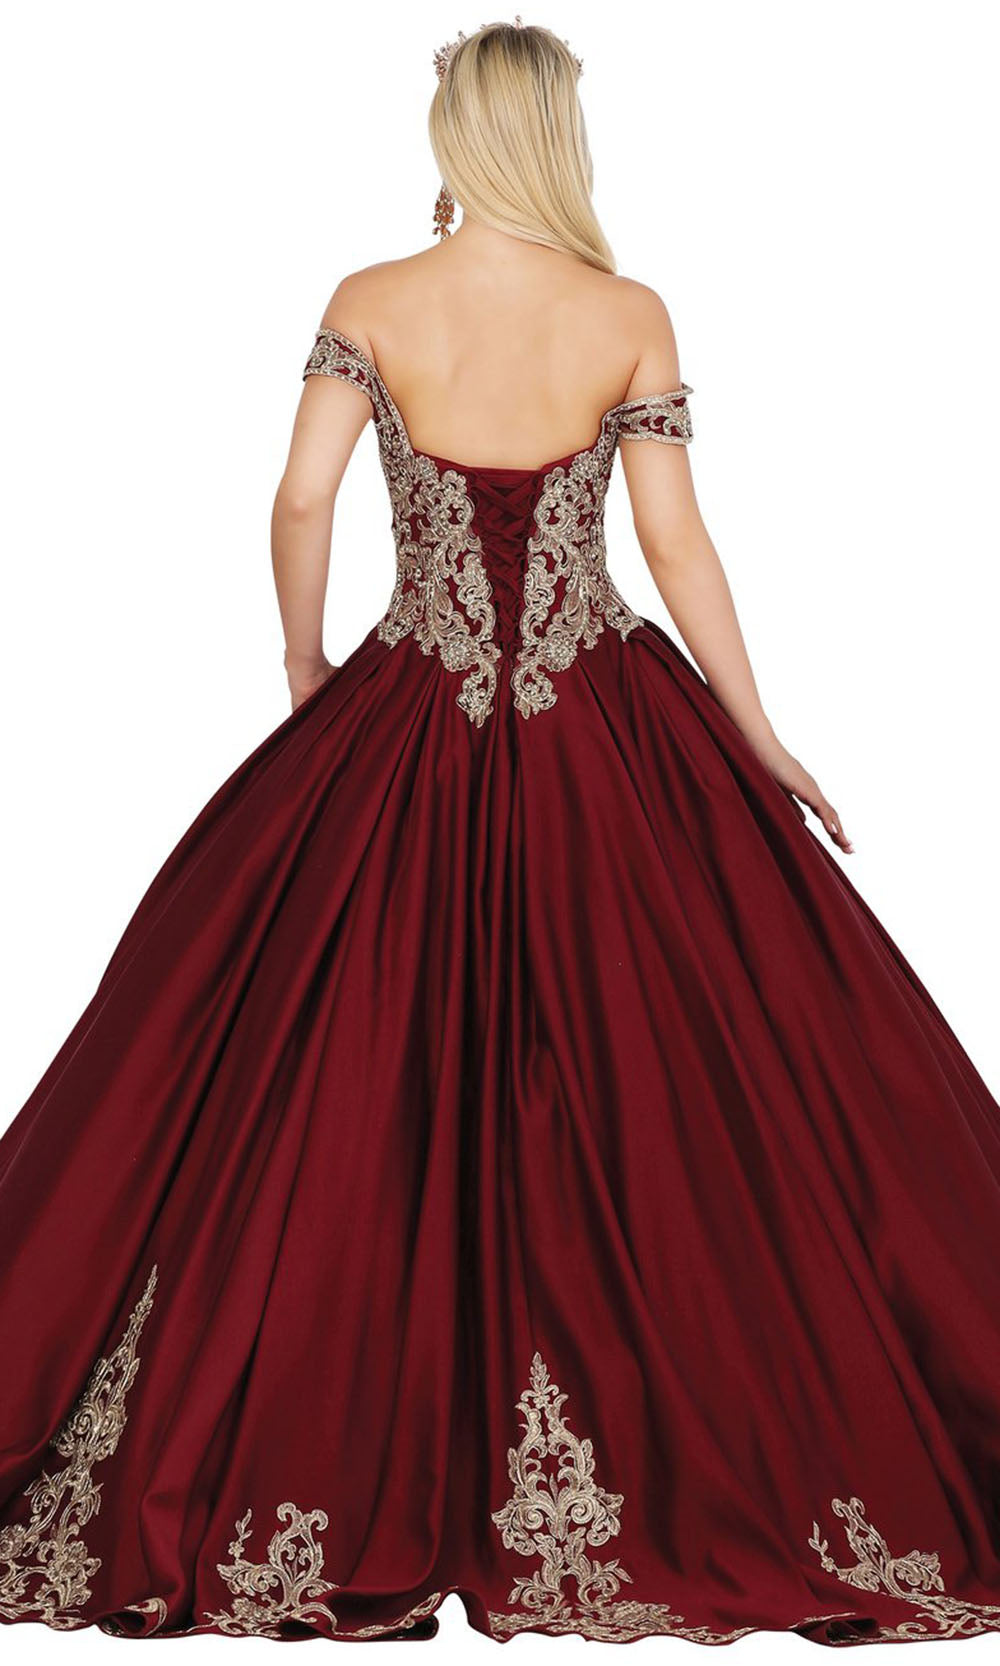 Dancing Queen - 1498 Embroidered Fit And Flare Ballgown In Red